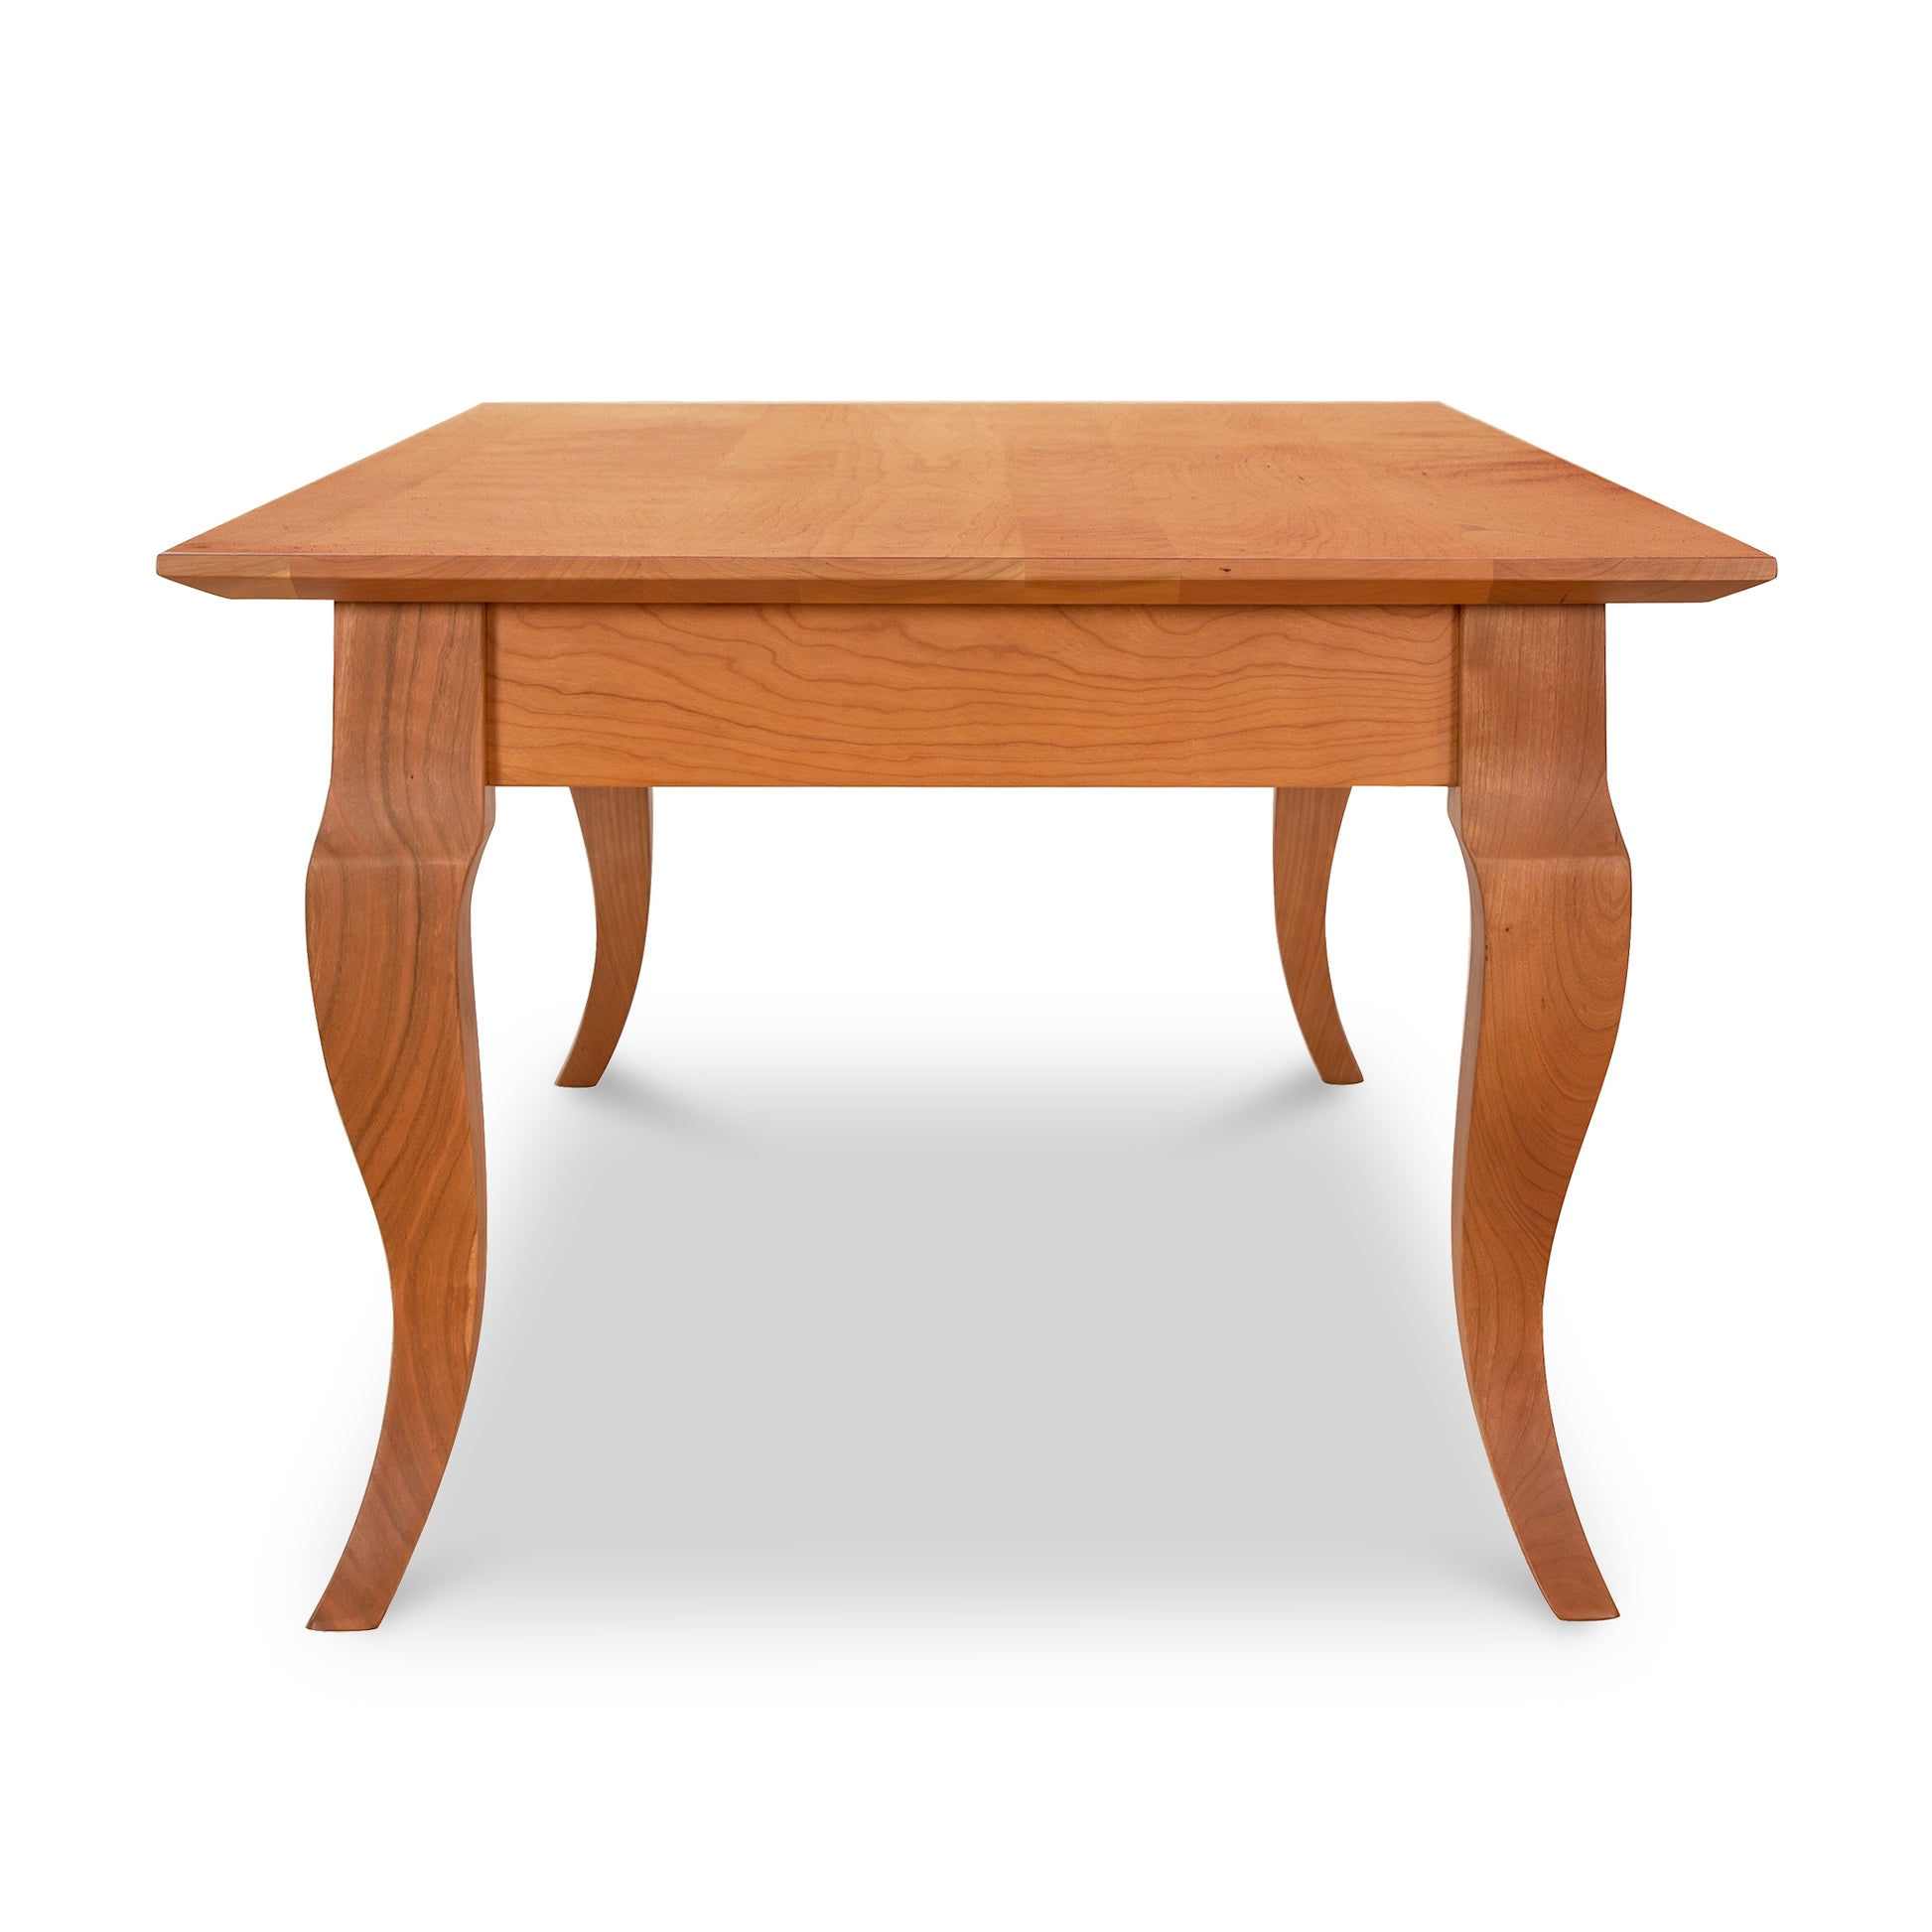 A French Country Coffee Table by Lyndon Furniture, with a curved leg.